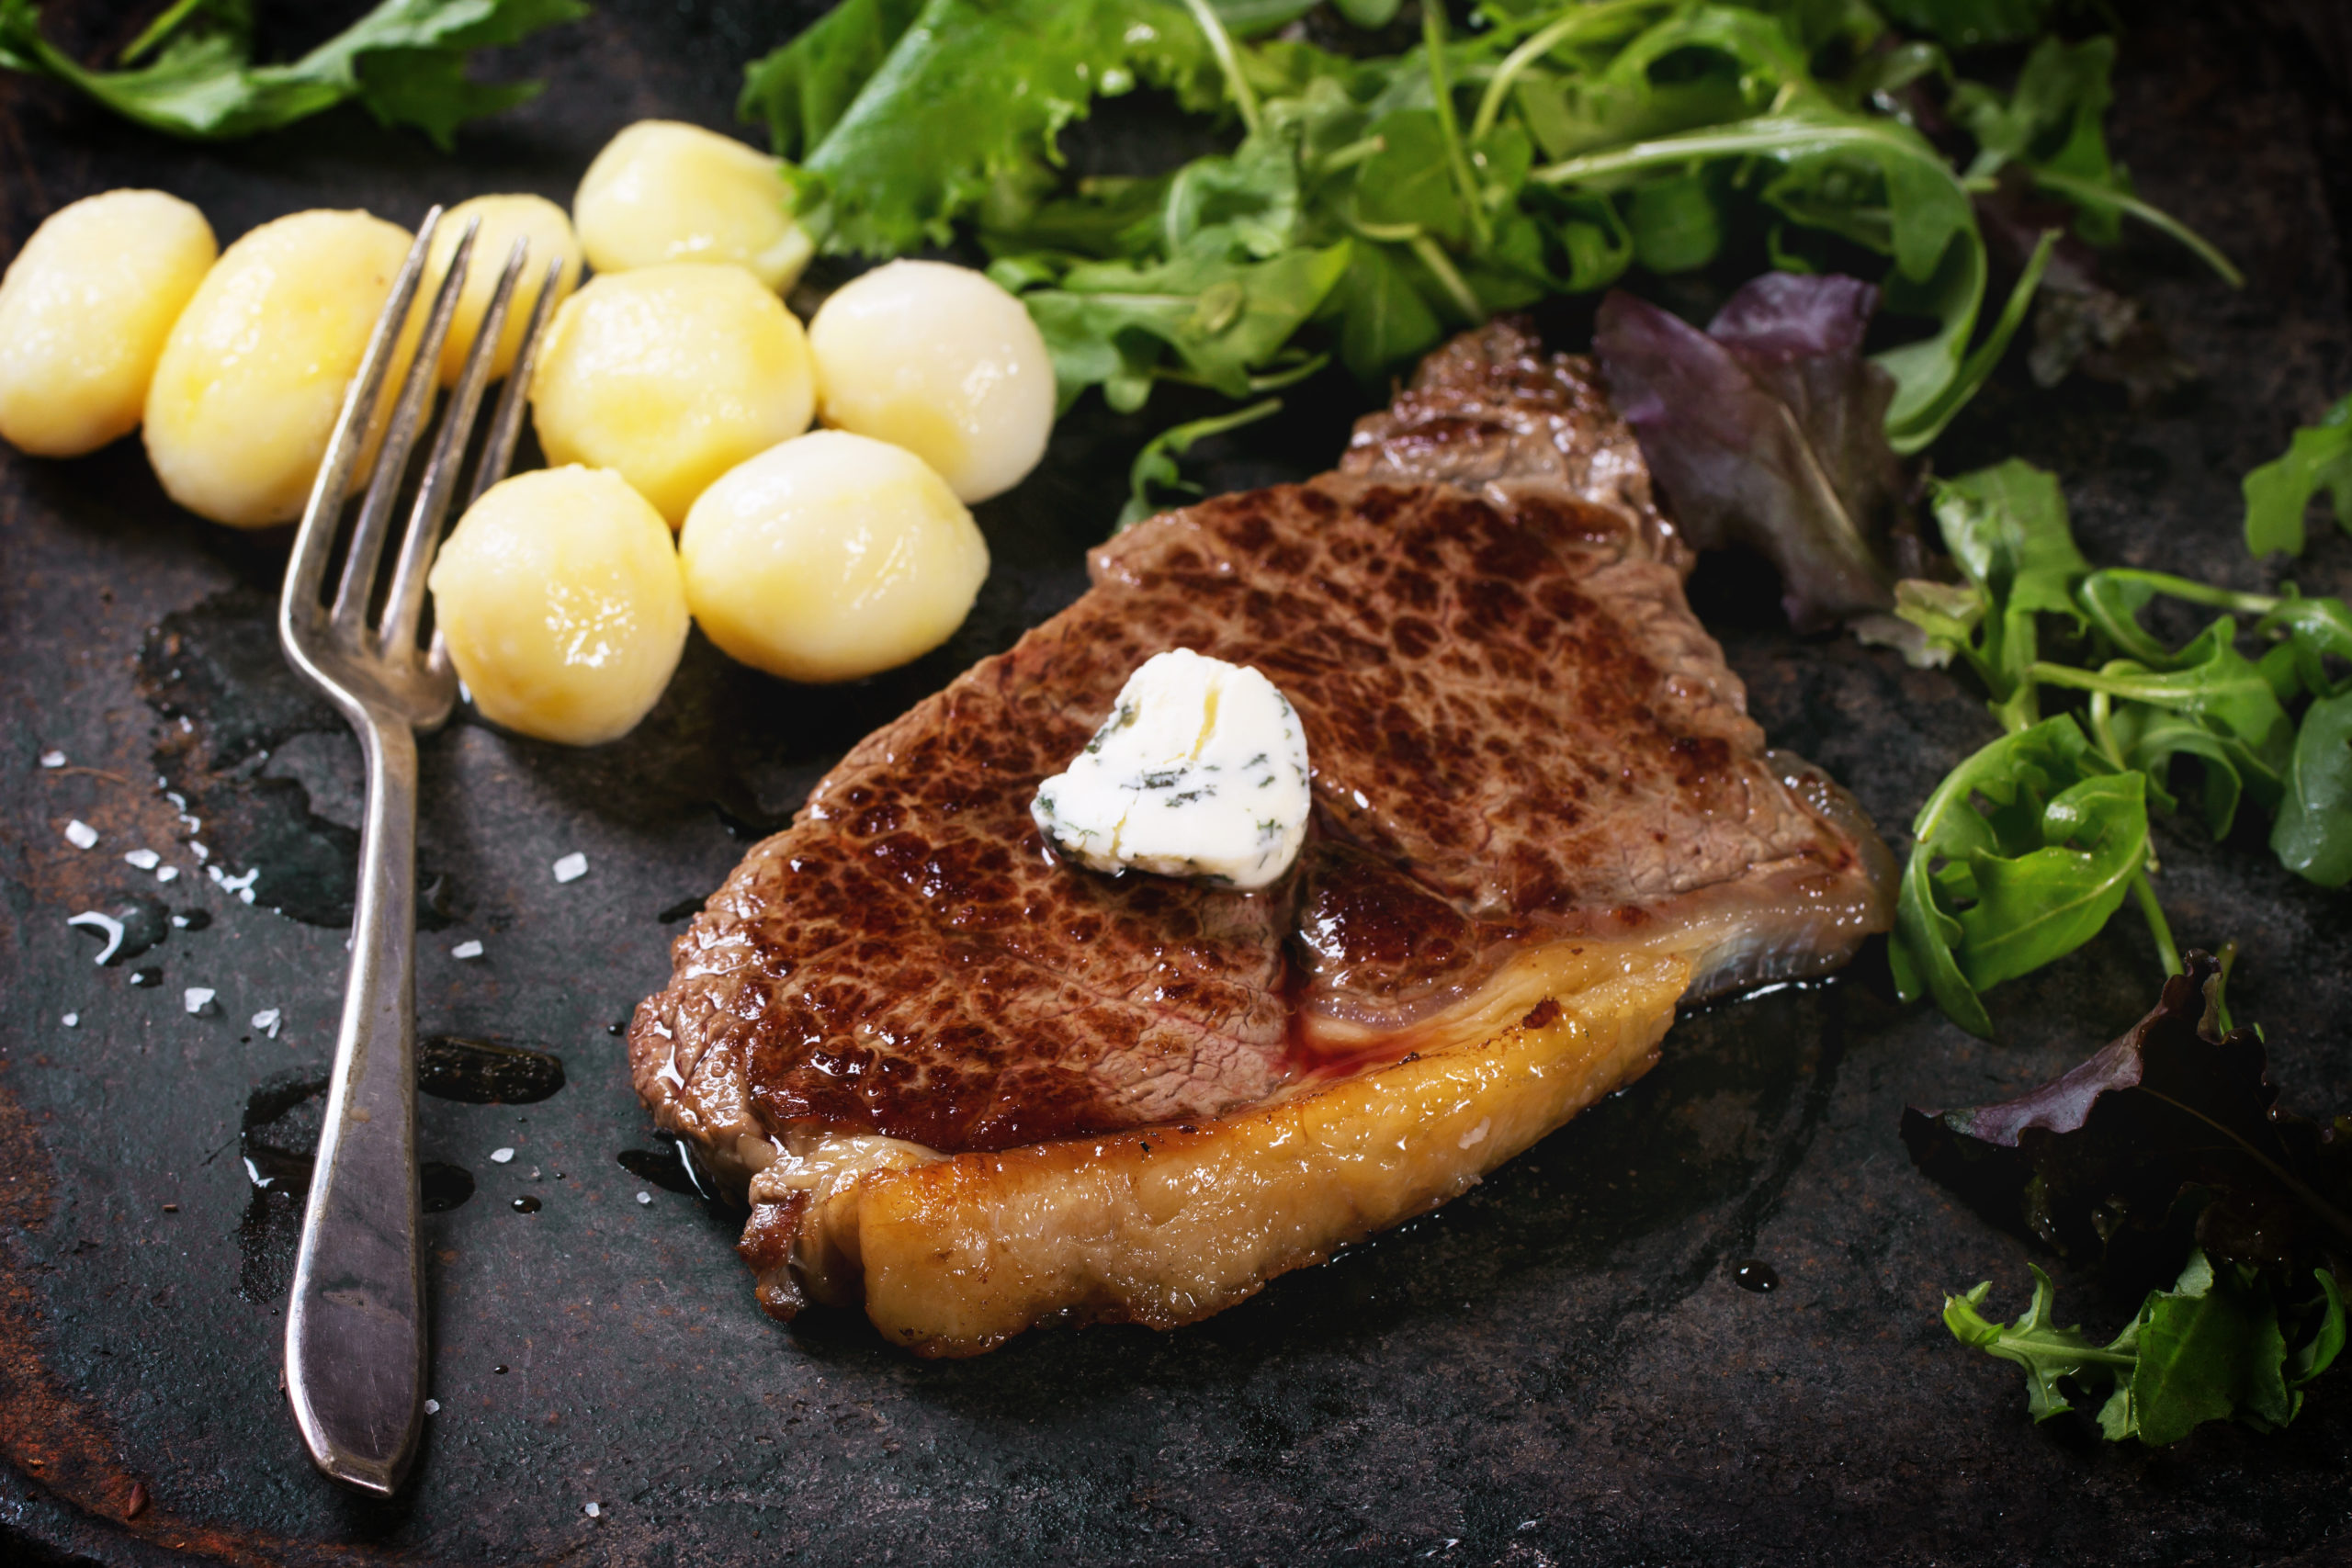 Grilled steak with butter, potatoes and green salad over black metal board